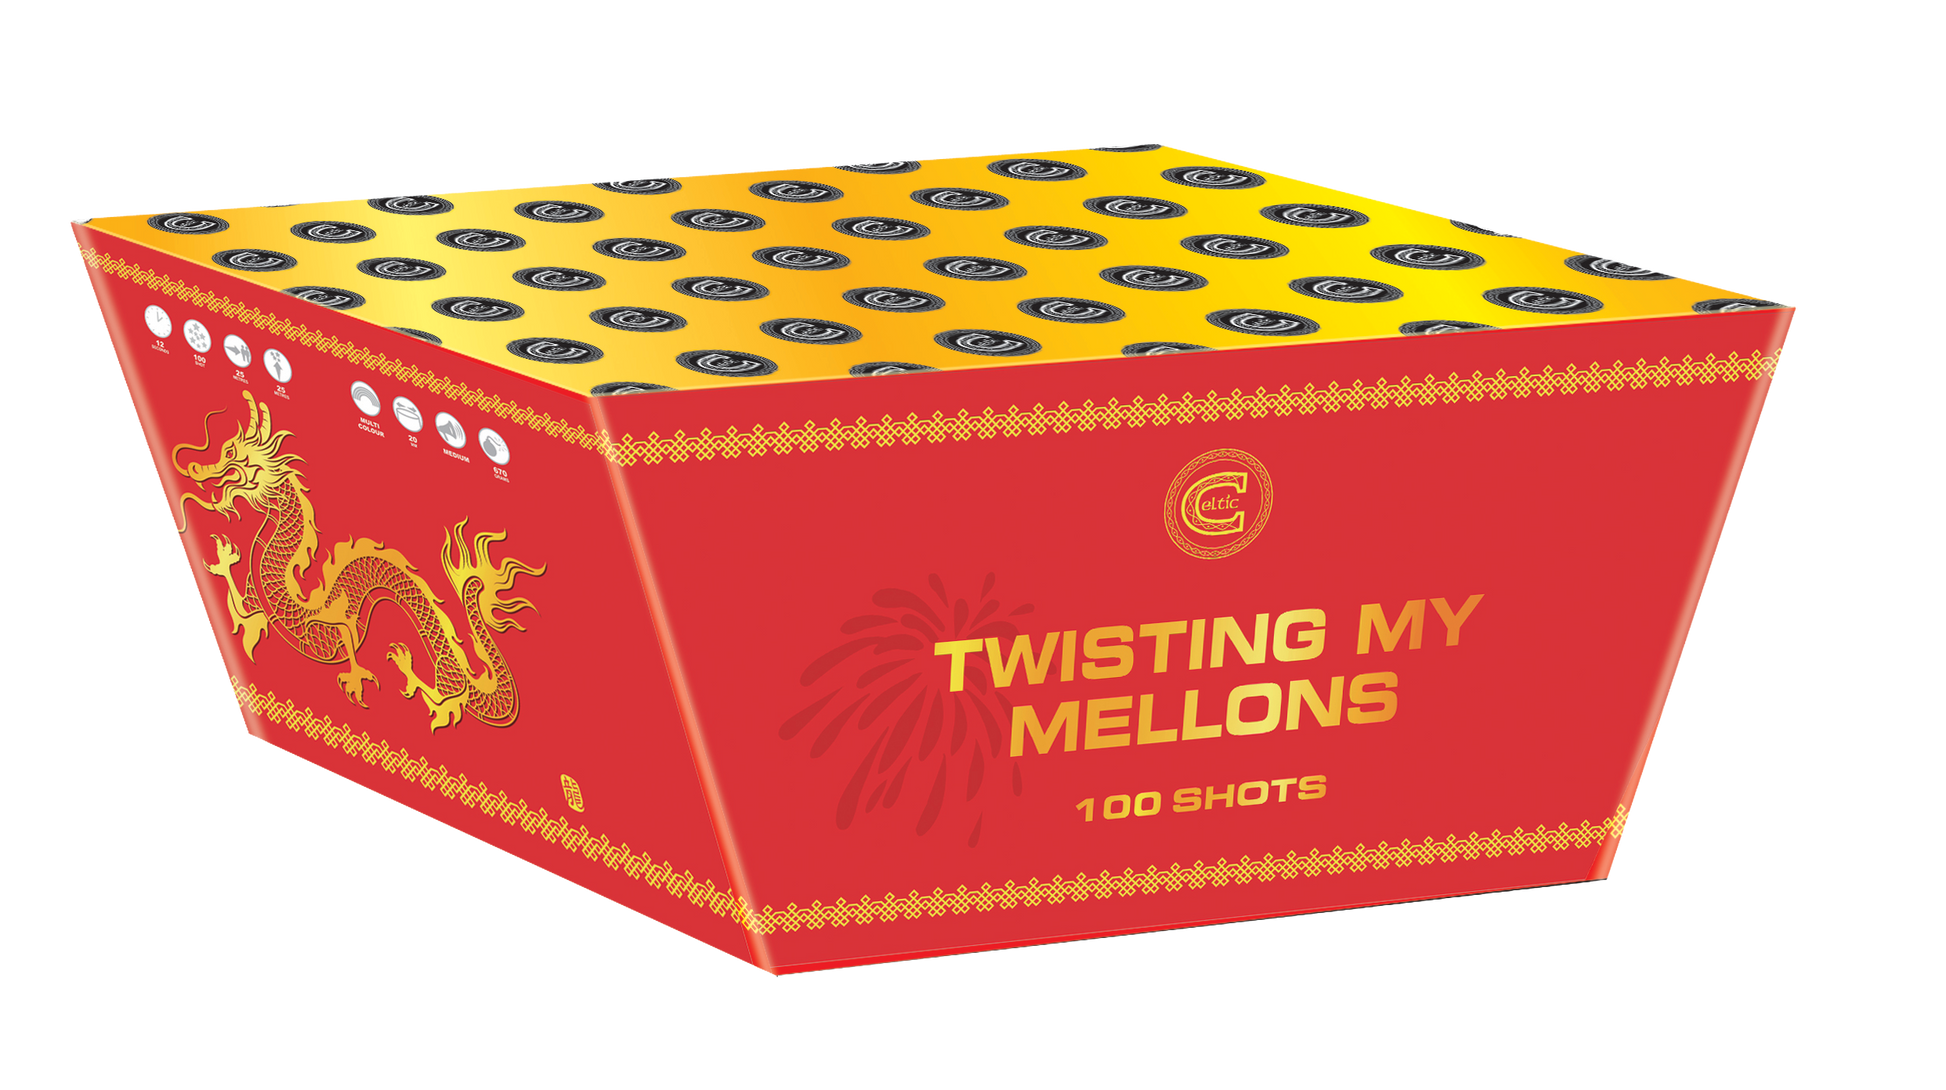 Twisting My Mellons by Celtic Fireworks